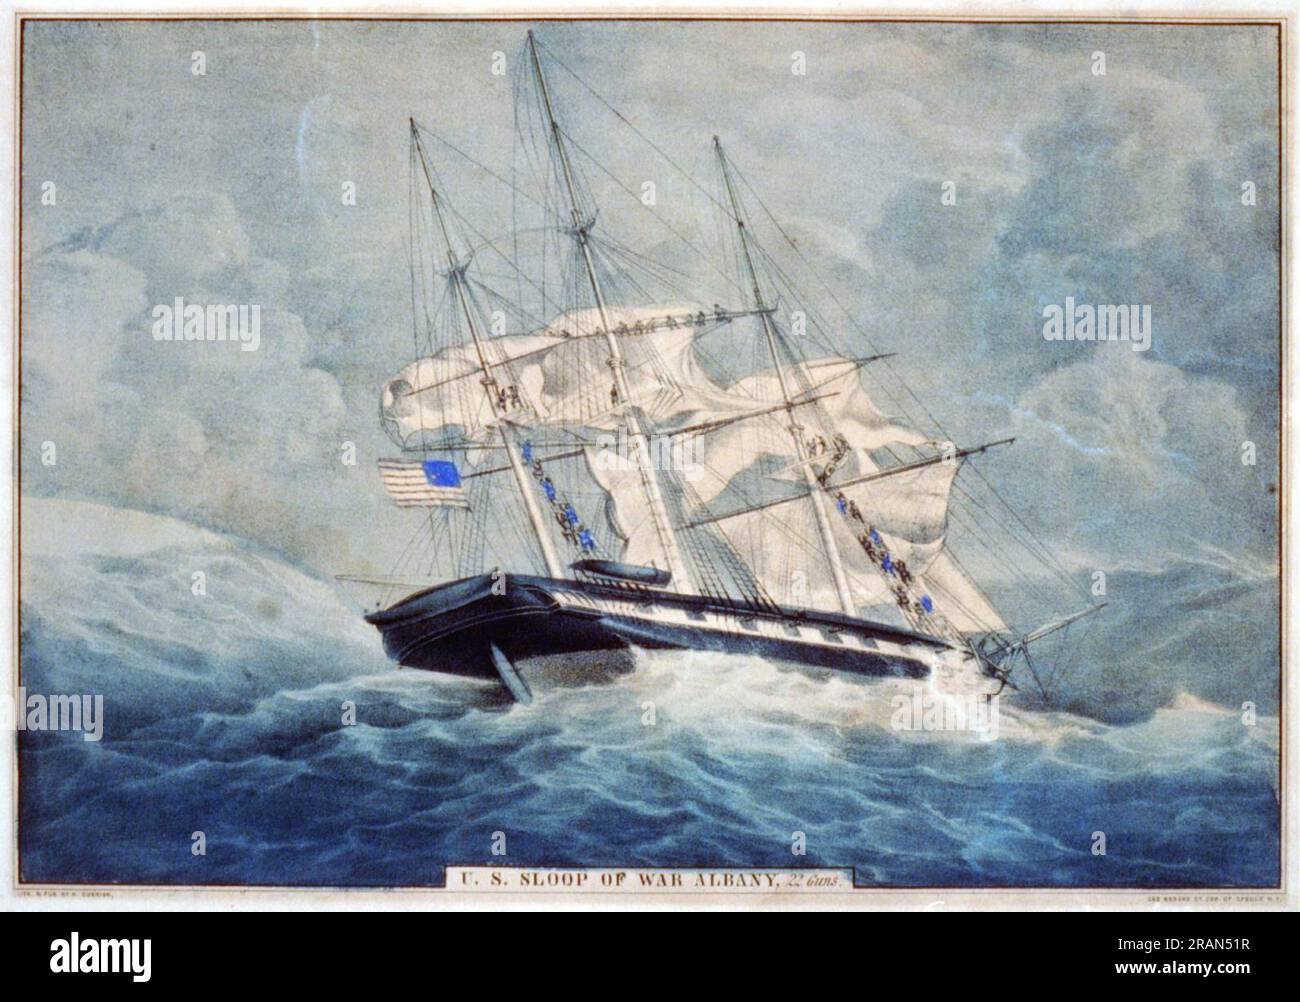 U.S. sloop of war Albany, 22 guns 1856 by Currier and Ives Stock Photo